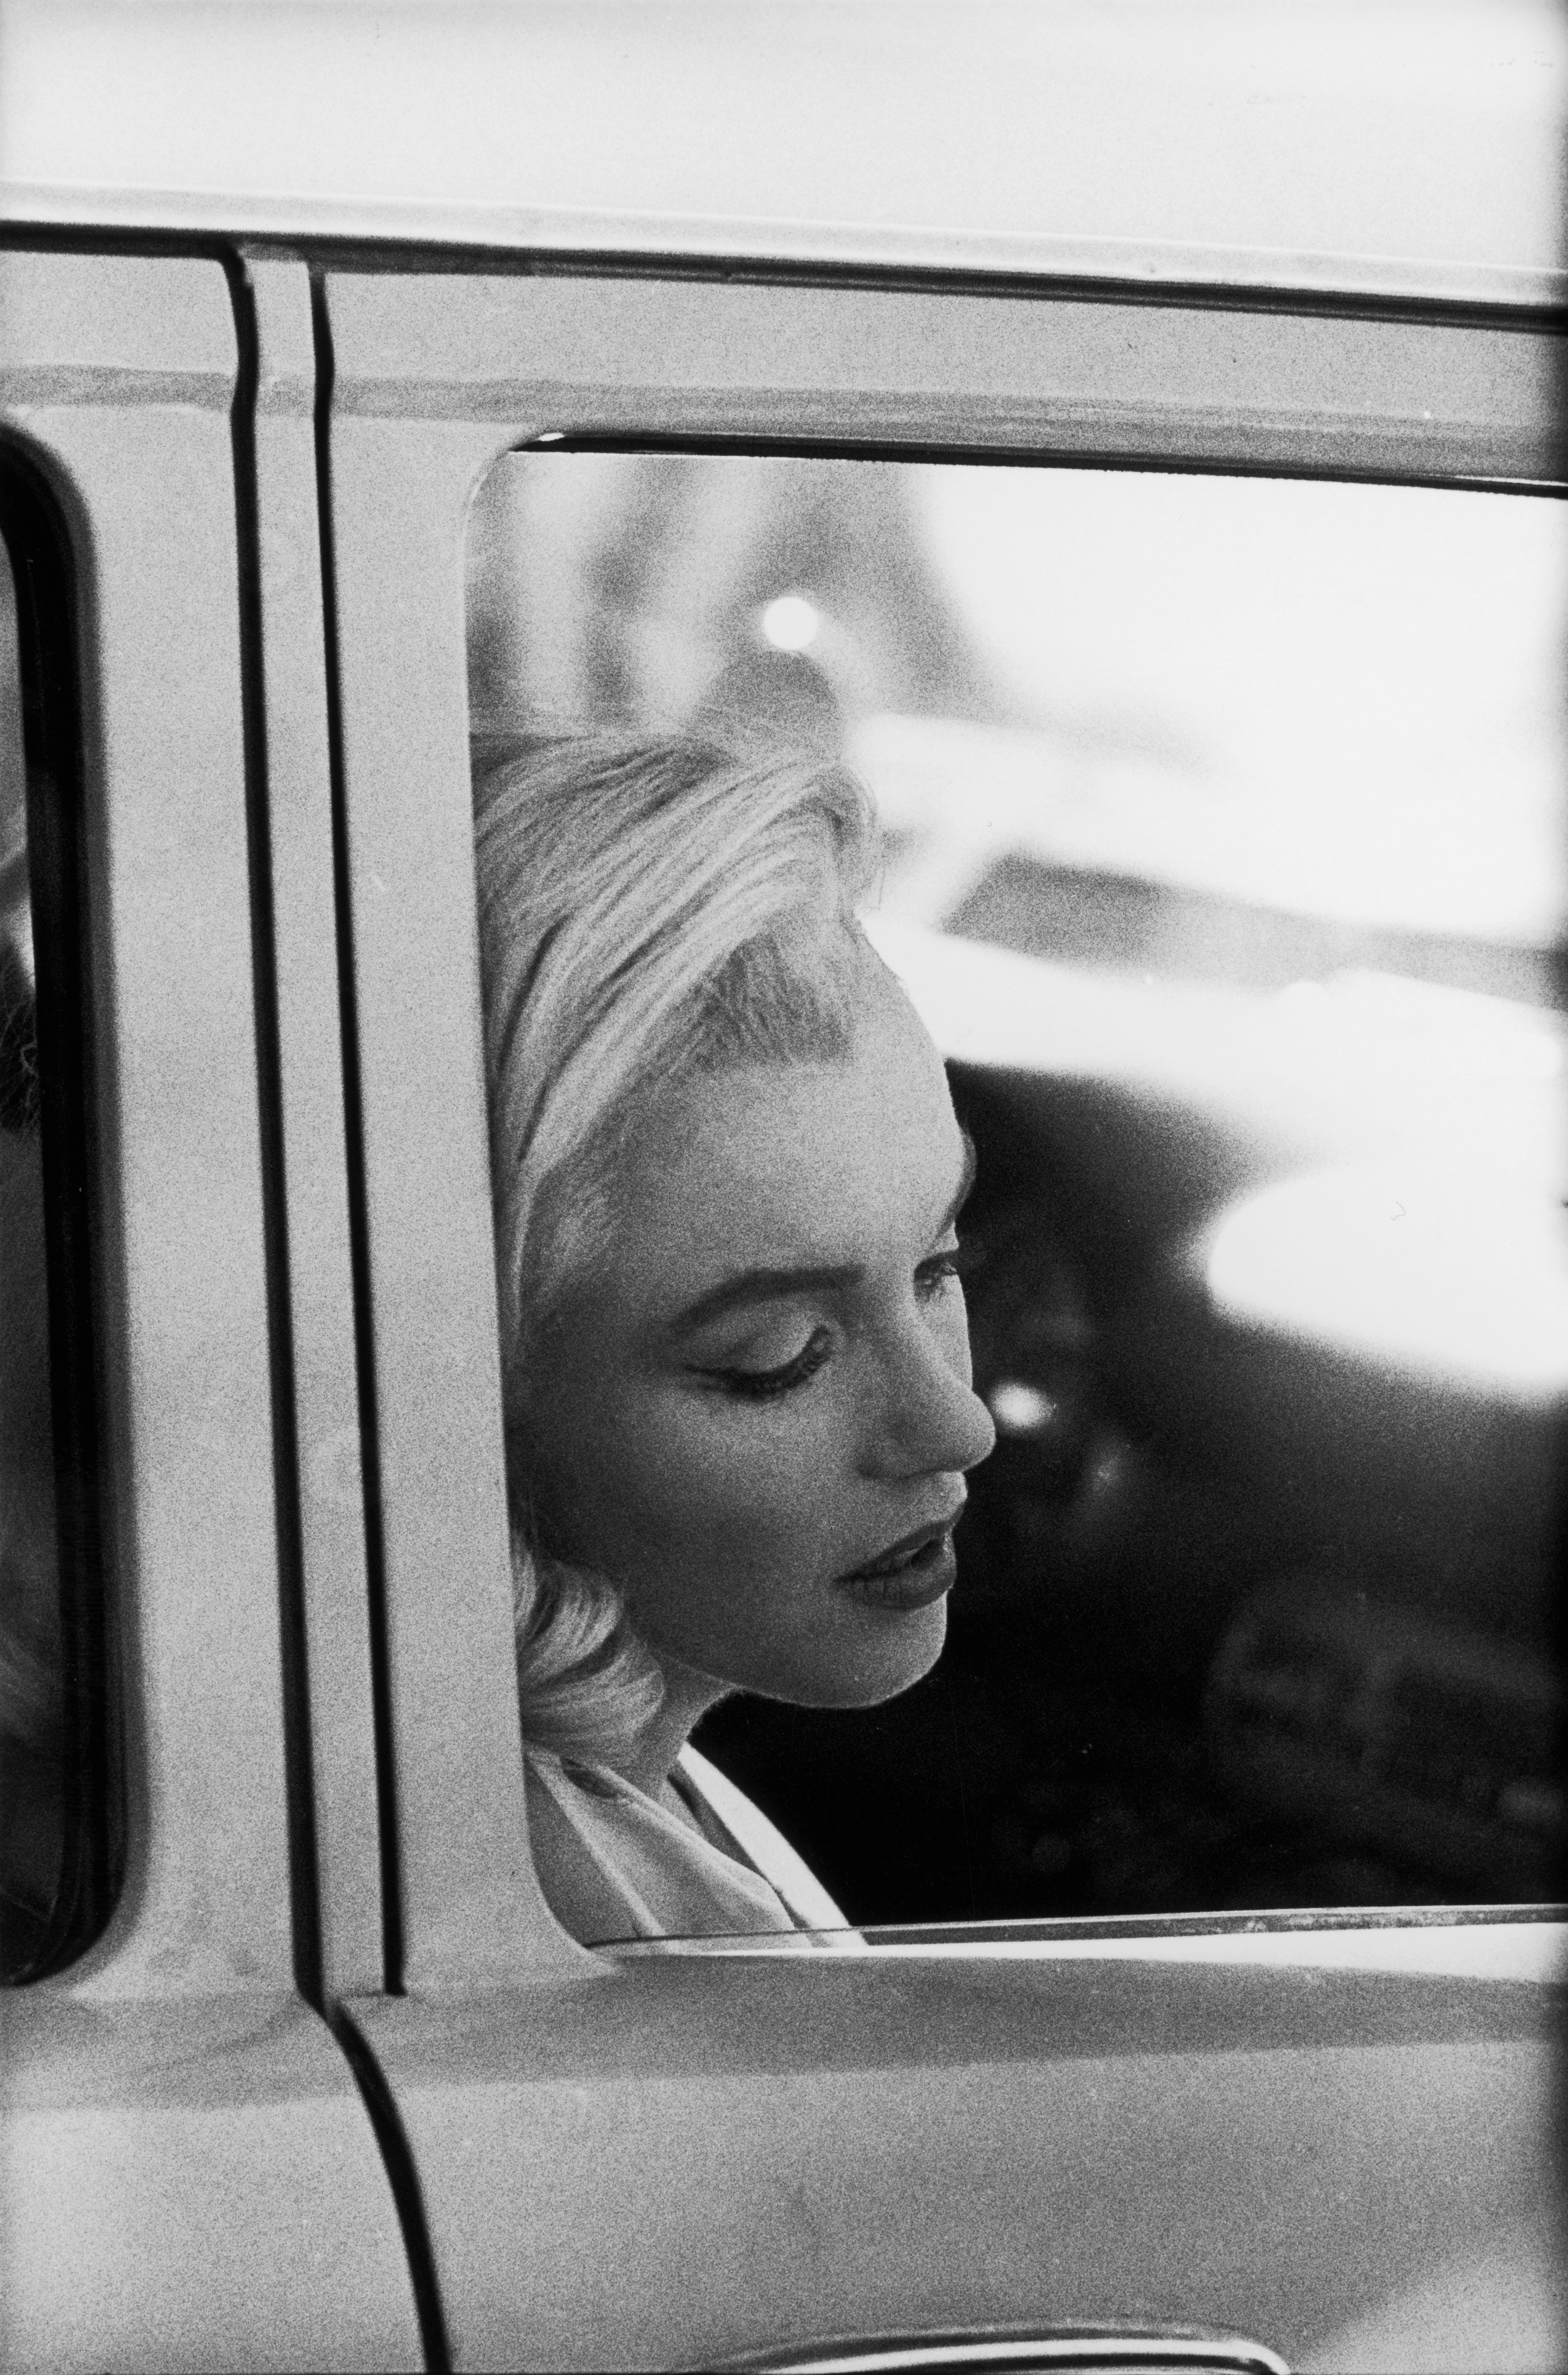 Marilyn Monroe pictured sitting in a car during the filming of "The Misfits" in the Nevada Desert in 1960. | Source: Getty Images